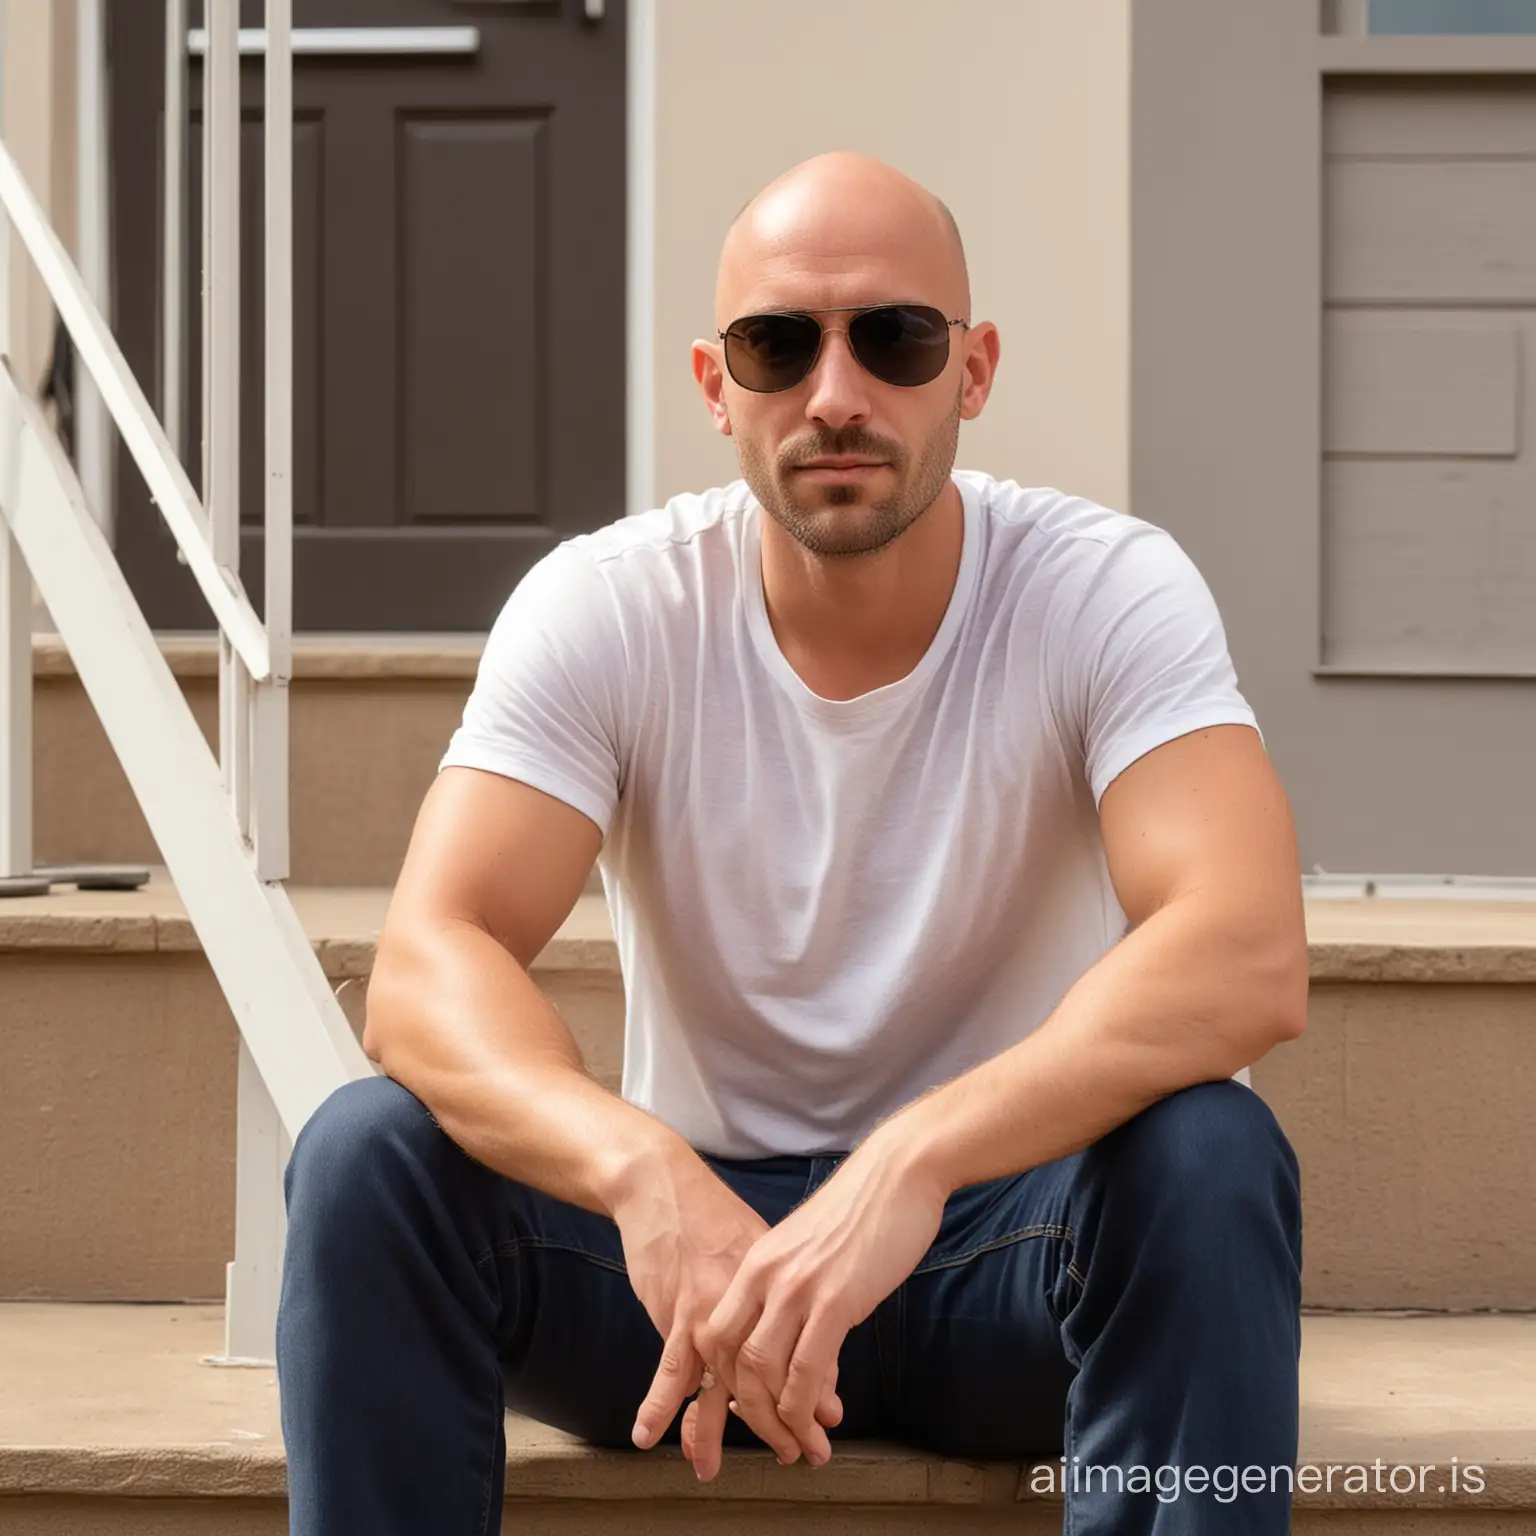 Bald man with stubble and sunglass sitting on steps outside the house